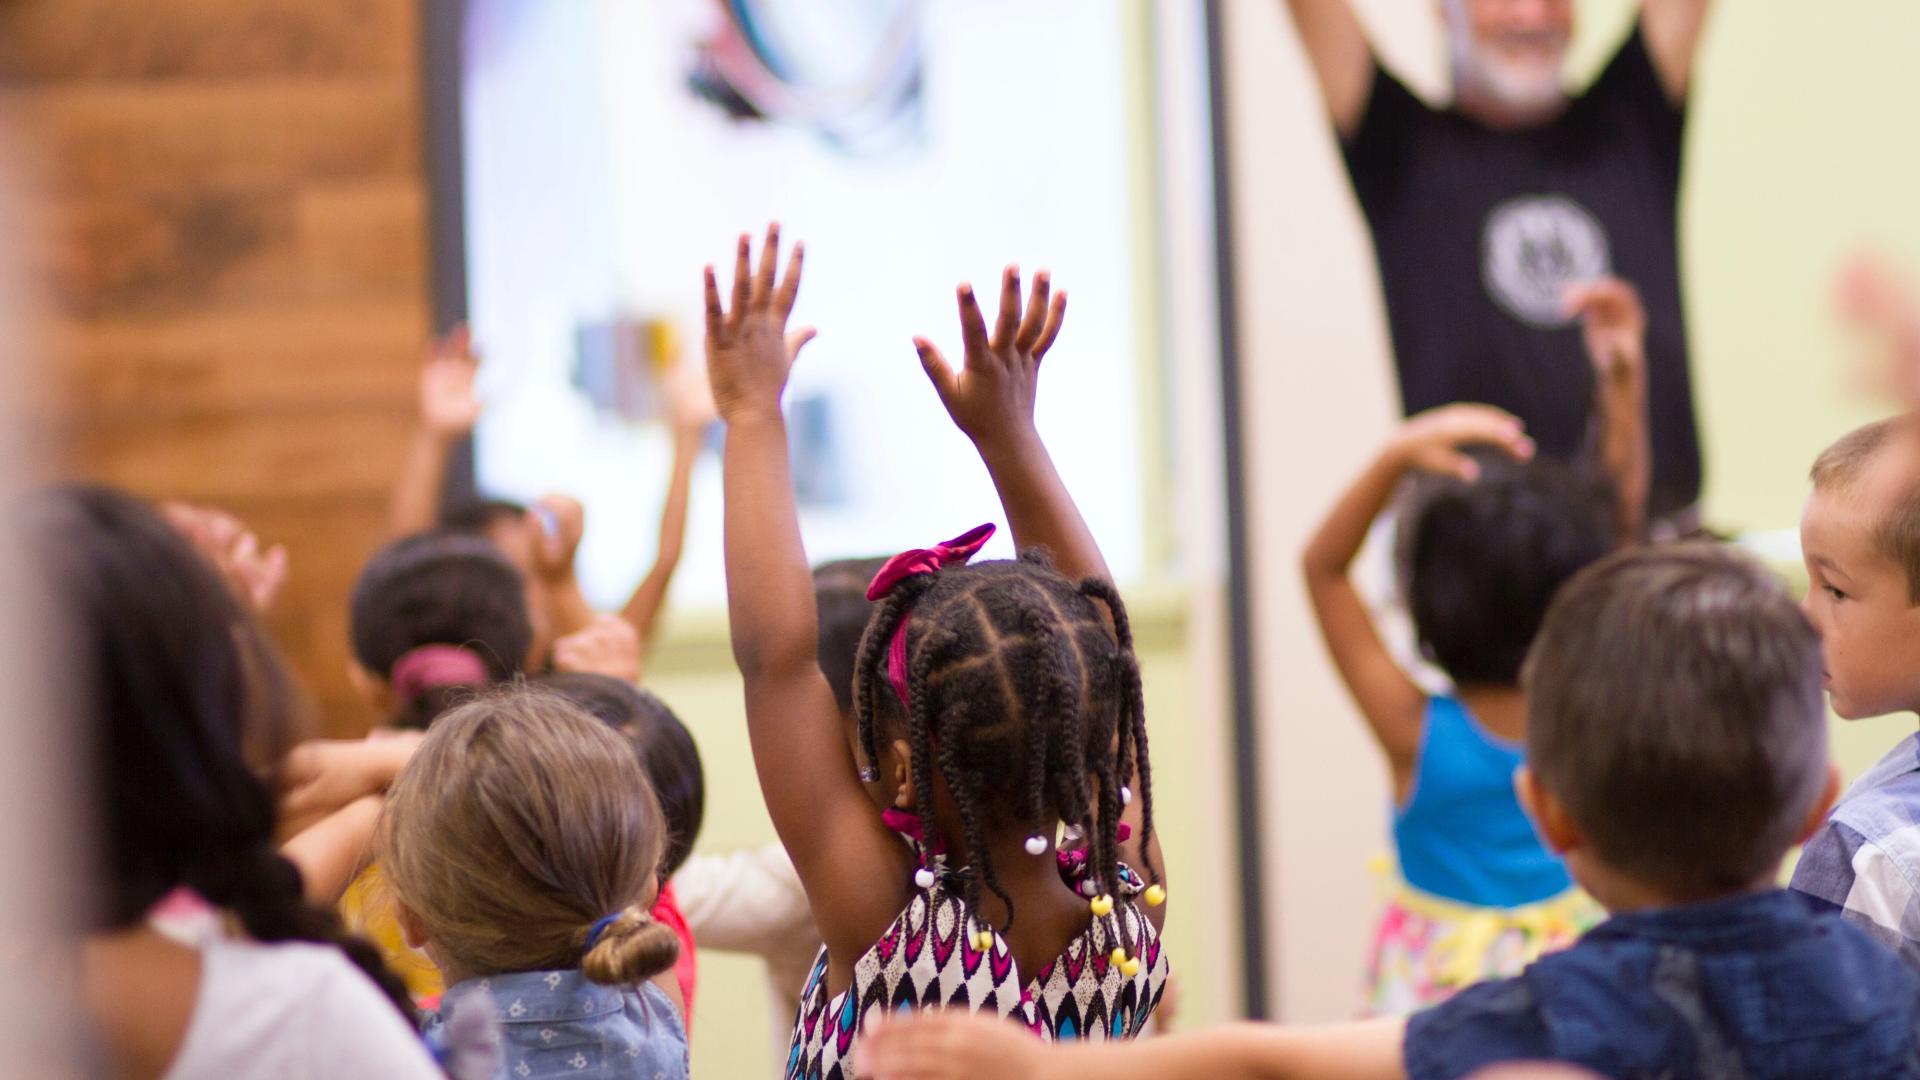 Children in a classroom are raising their hands